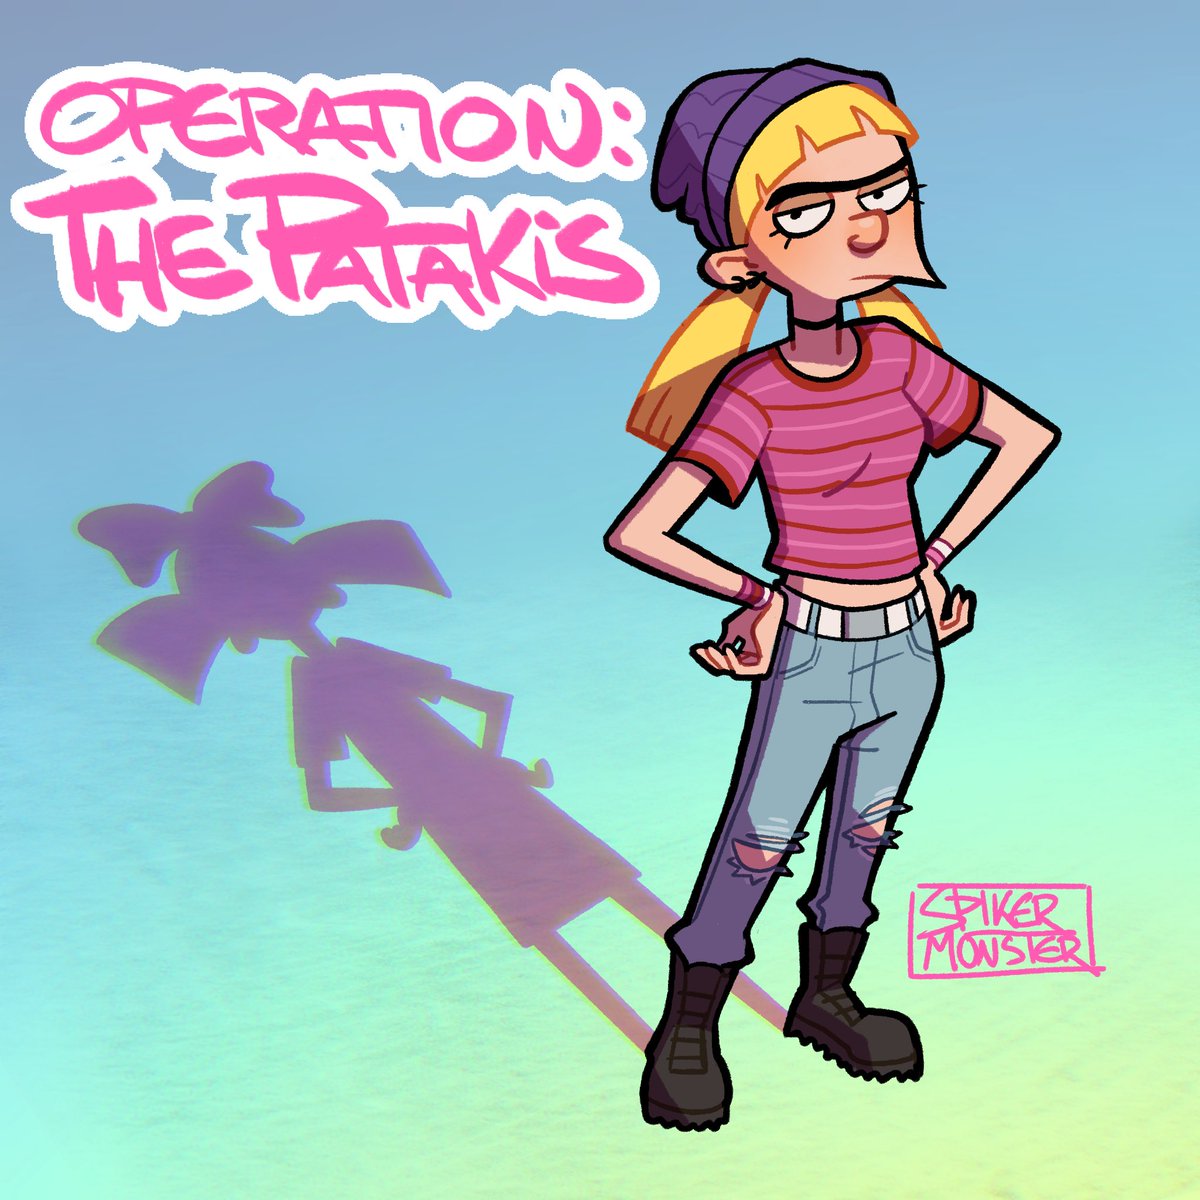 thank you for helping us reach 20% of our goal in just a week!
that's 4k out of 20k signatures needed!

let's keep going and bring back The Patakis!
#heyarnold #operationthepatakis @OPThePatakis